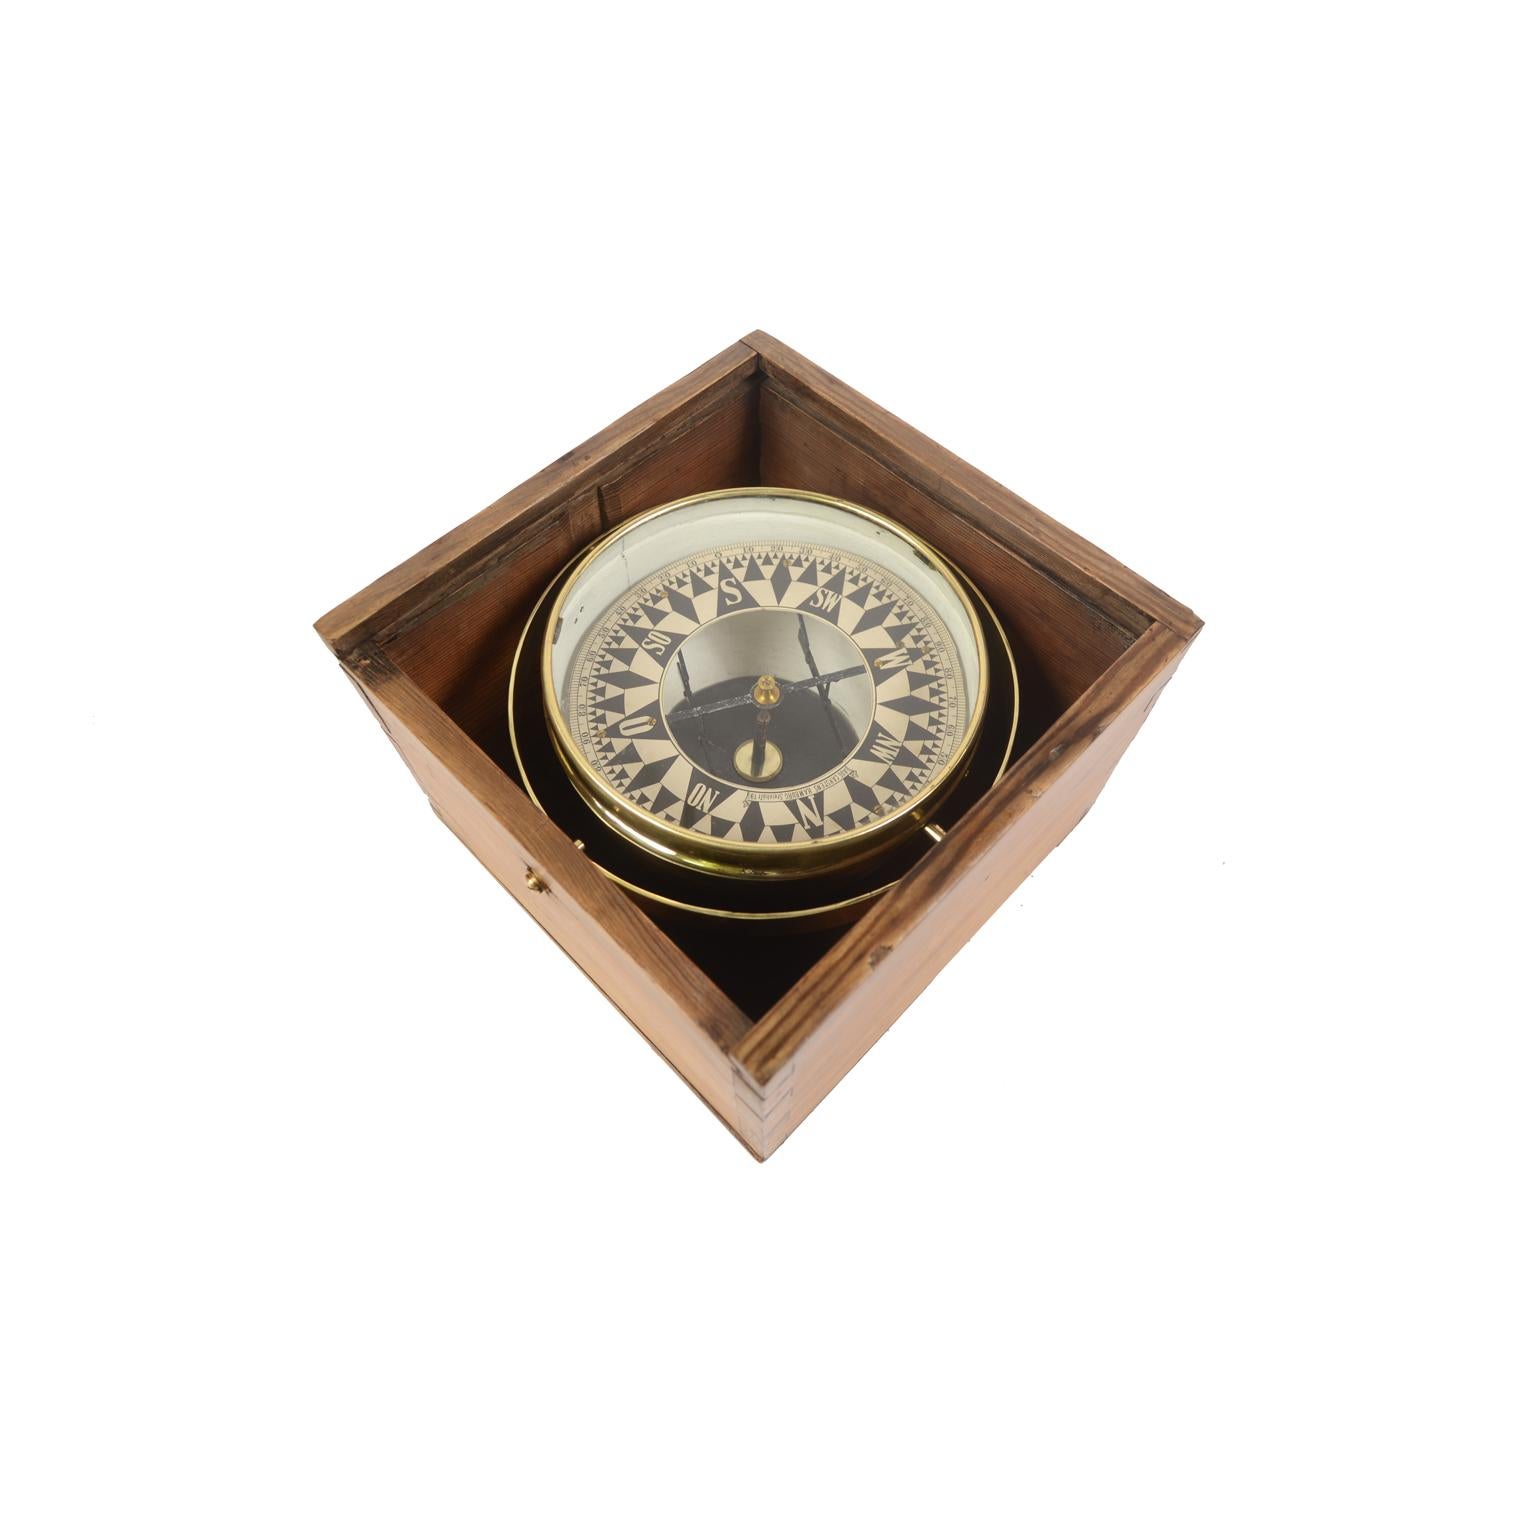 Large dry compass placed in its original wooden box with slot lid. Signed AUG. CARSTENS Hamburg Steinhöft 19 from the second half of the 19th century. The compass consists of a brass and glass vessel on the bottom of which a metal stem is fixed on